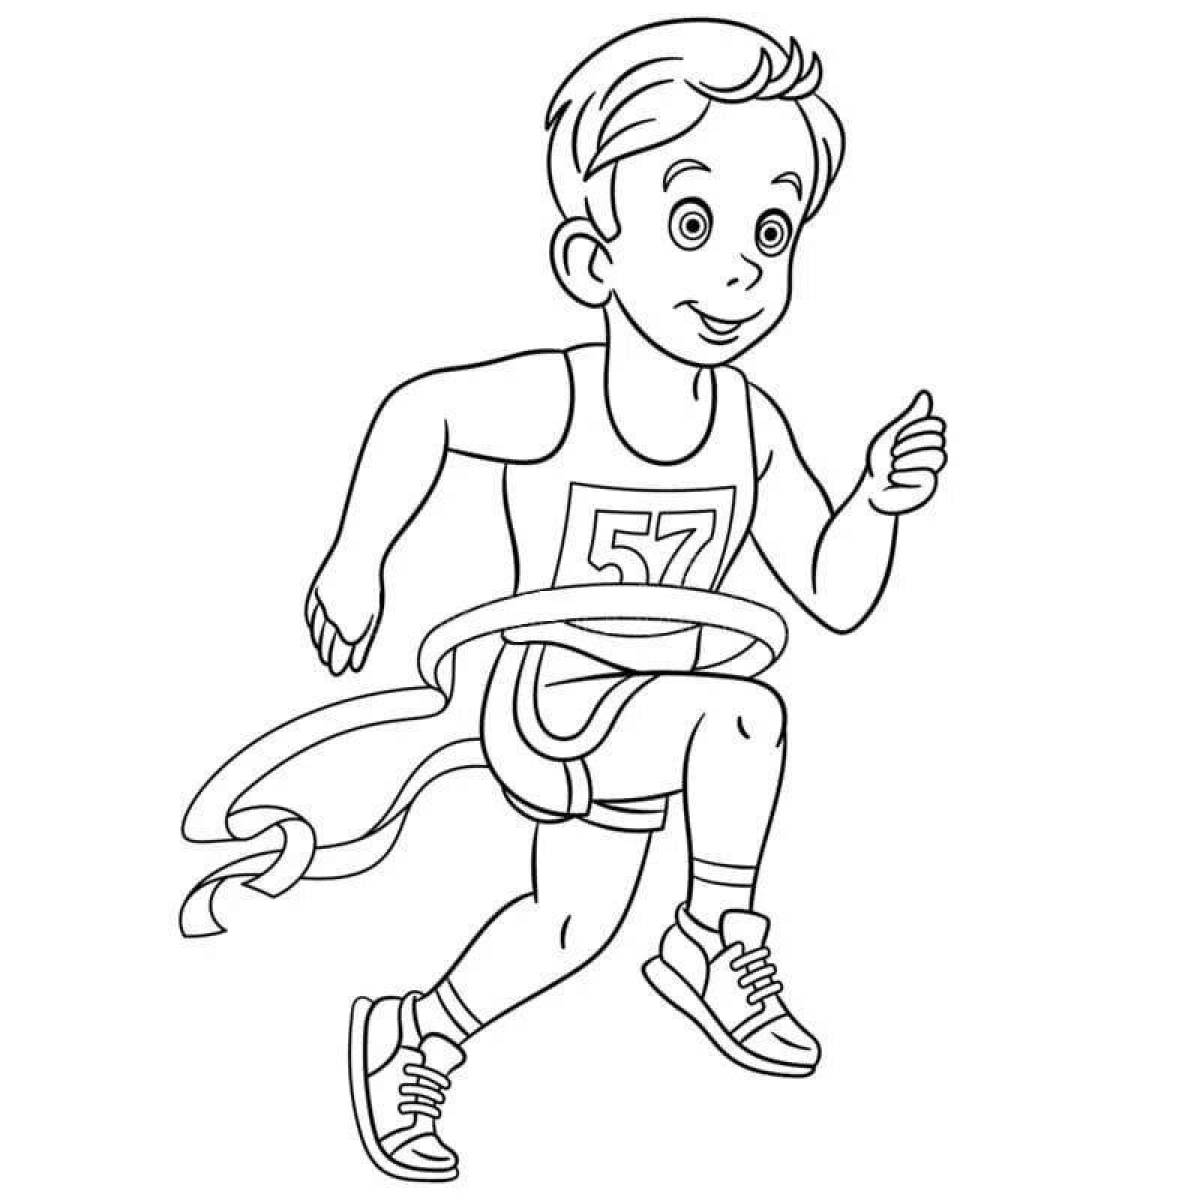 Coloring page exciting run